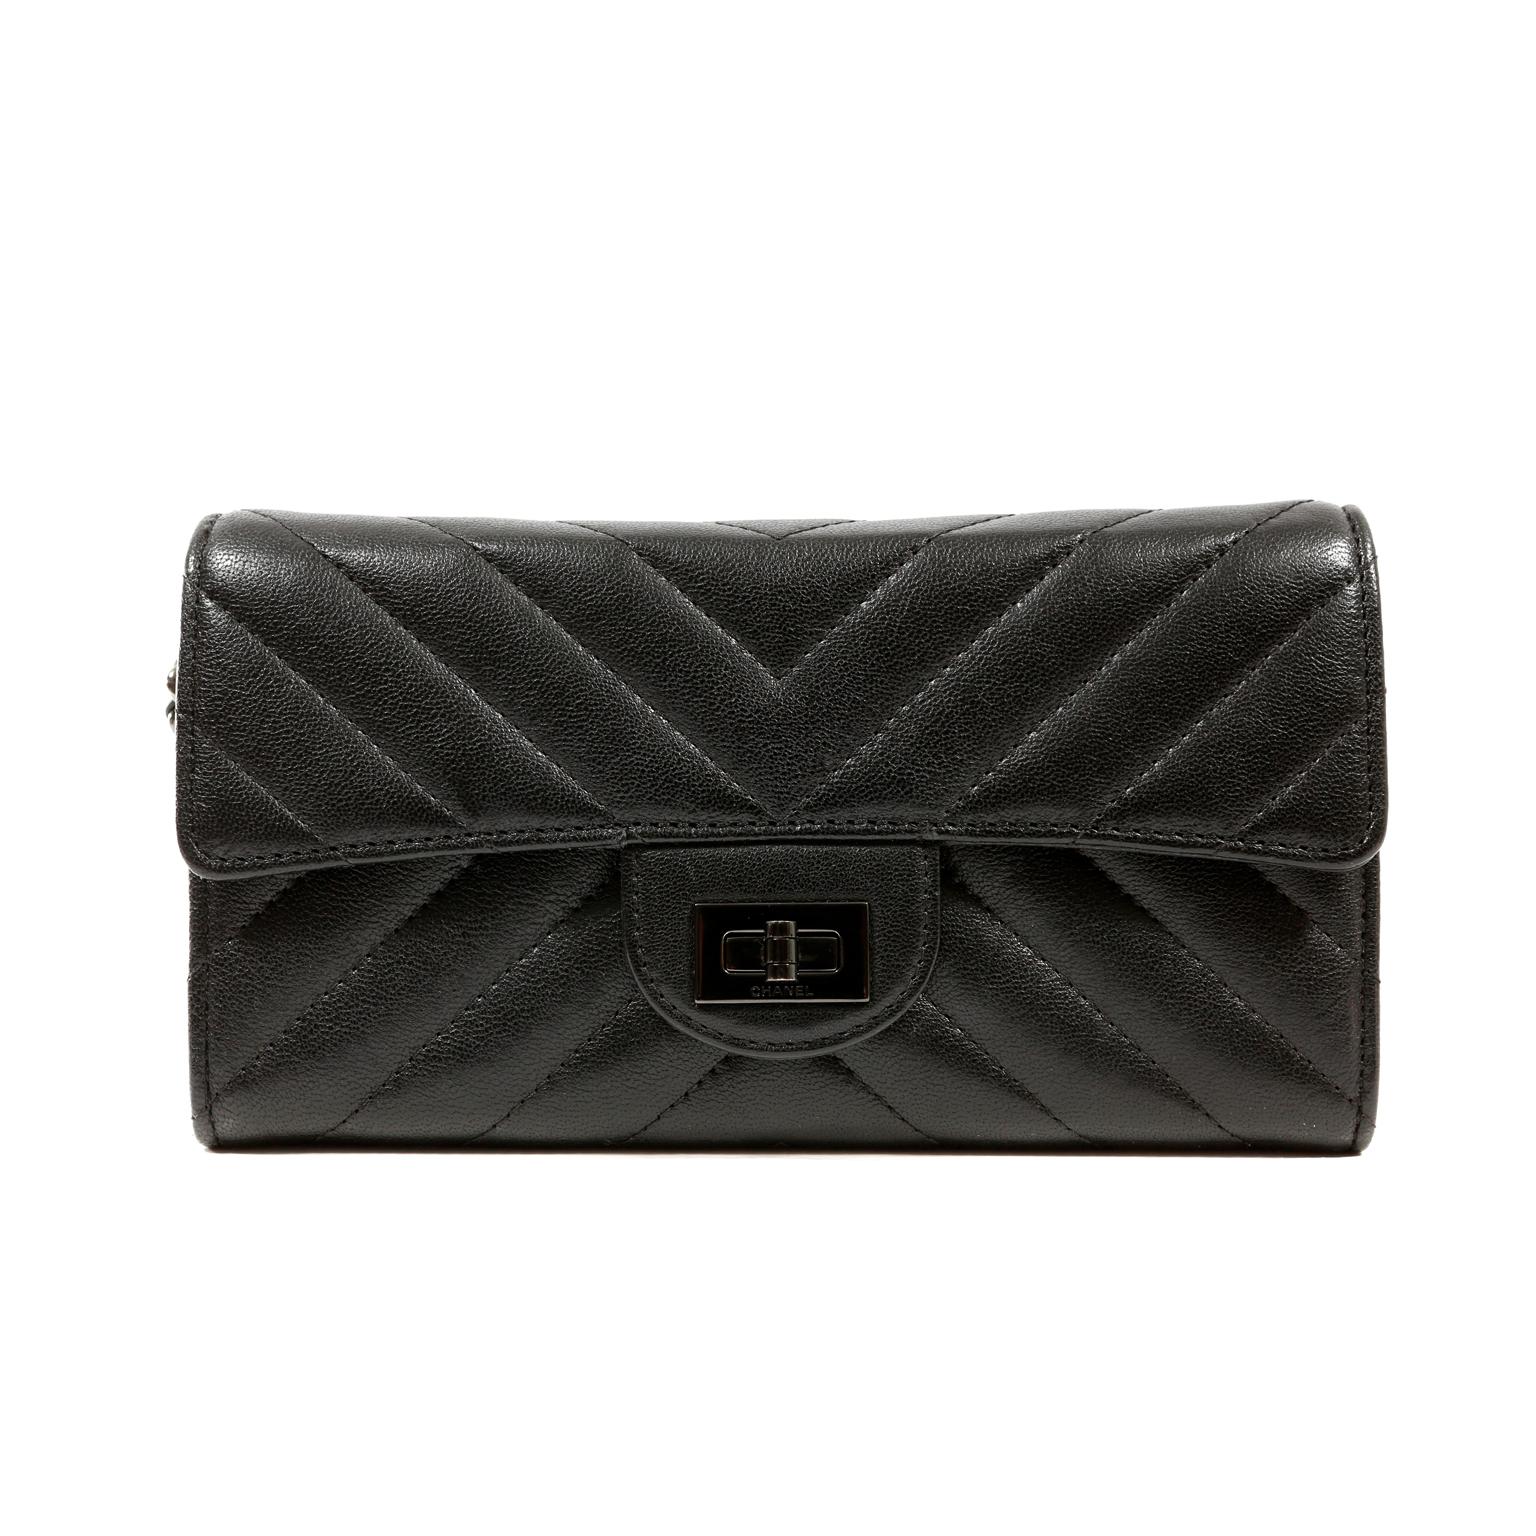 Women's Chanel So Black Chevron Leather Wallet on a Chain For Sale